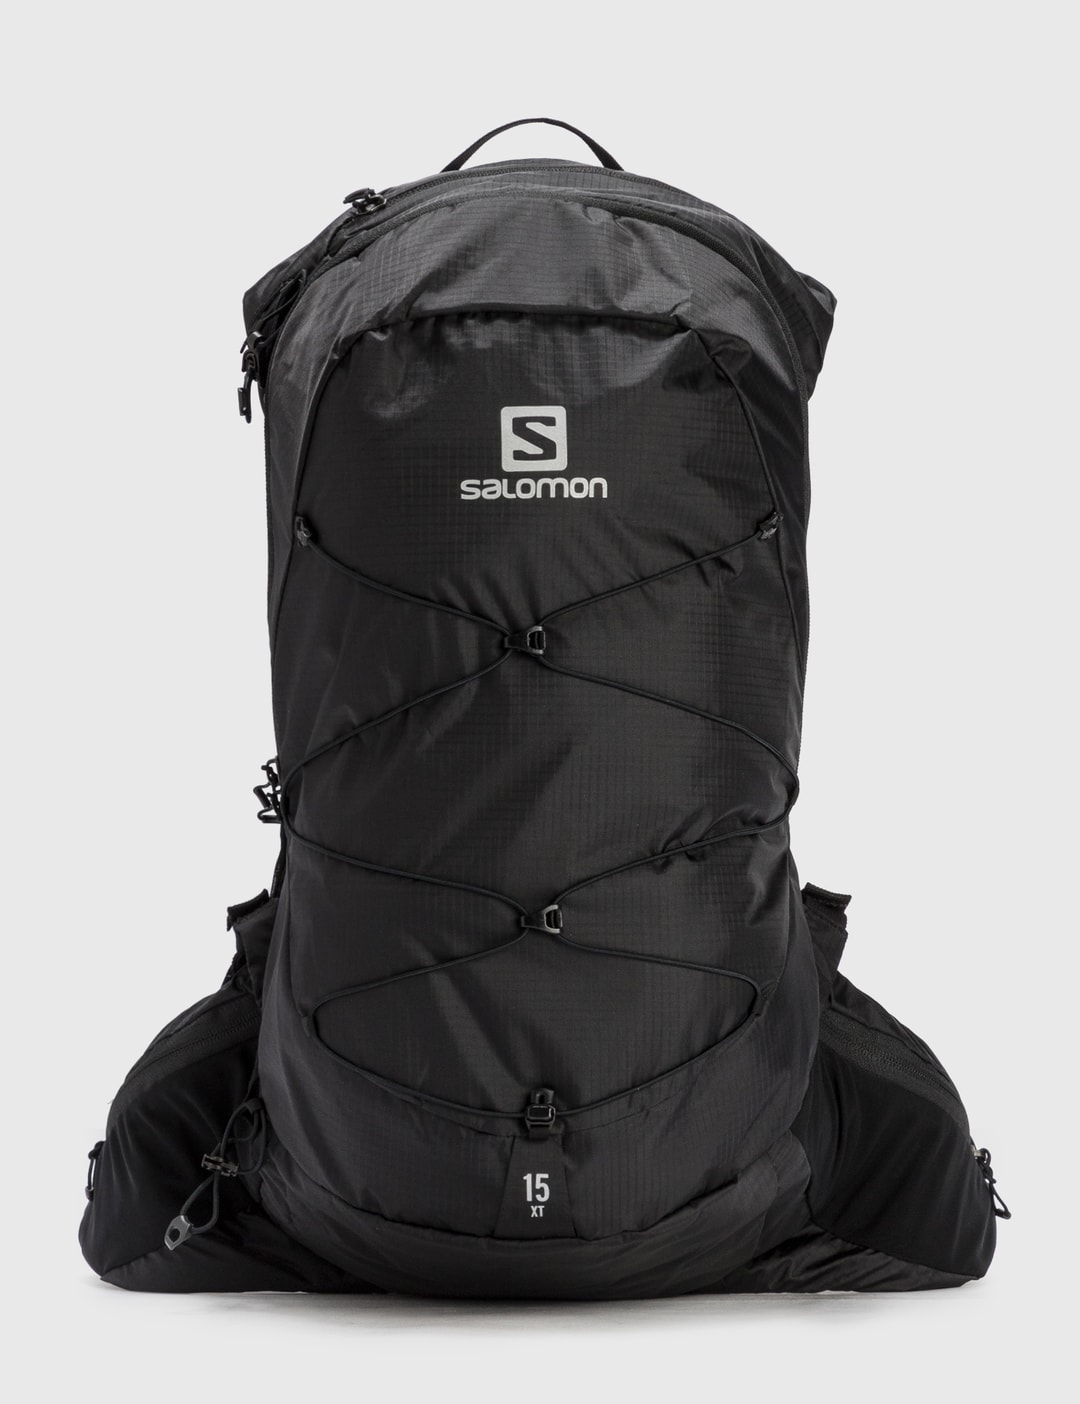 miles Komprimere Recept Salomon - Xt 15 Backpack | HBX - Globally Curated Fashion and Lifestyle by  Hypebeast